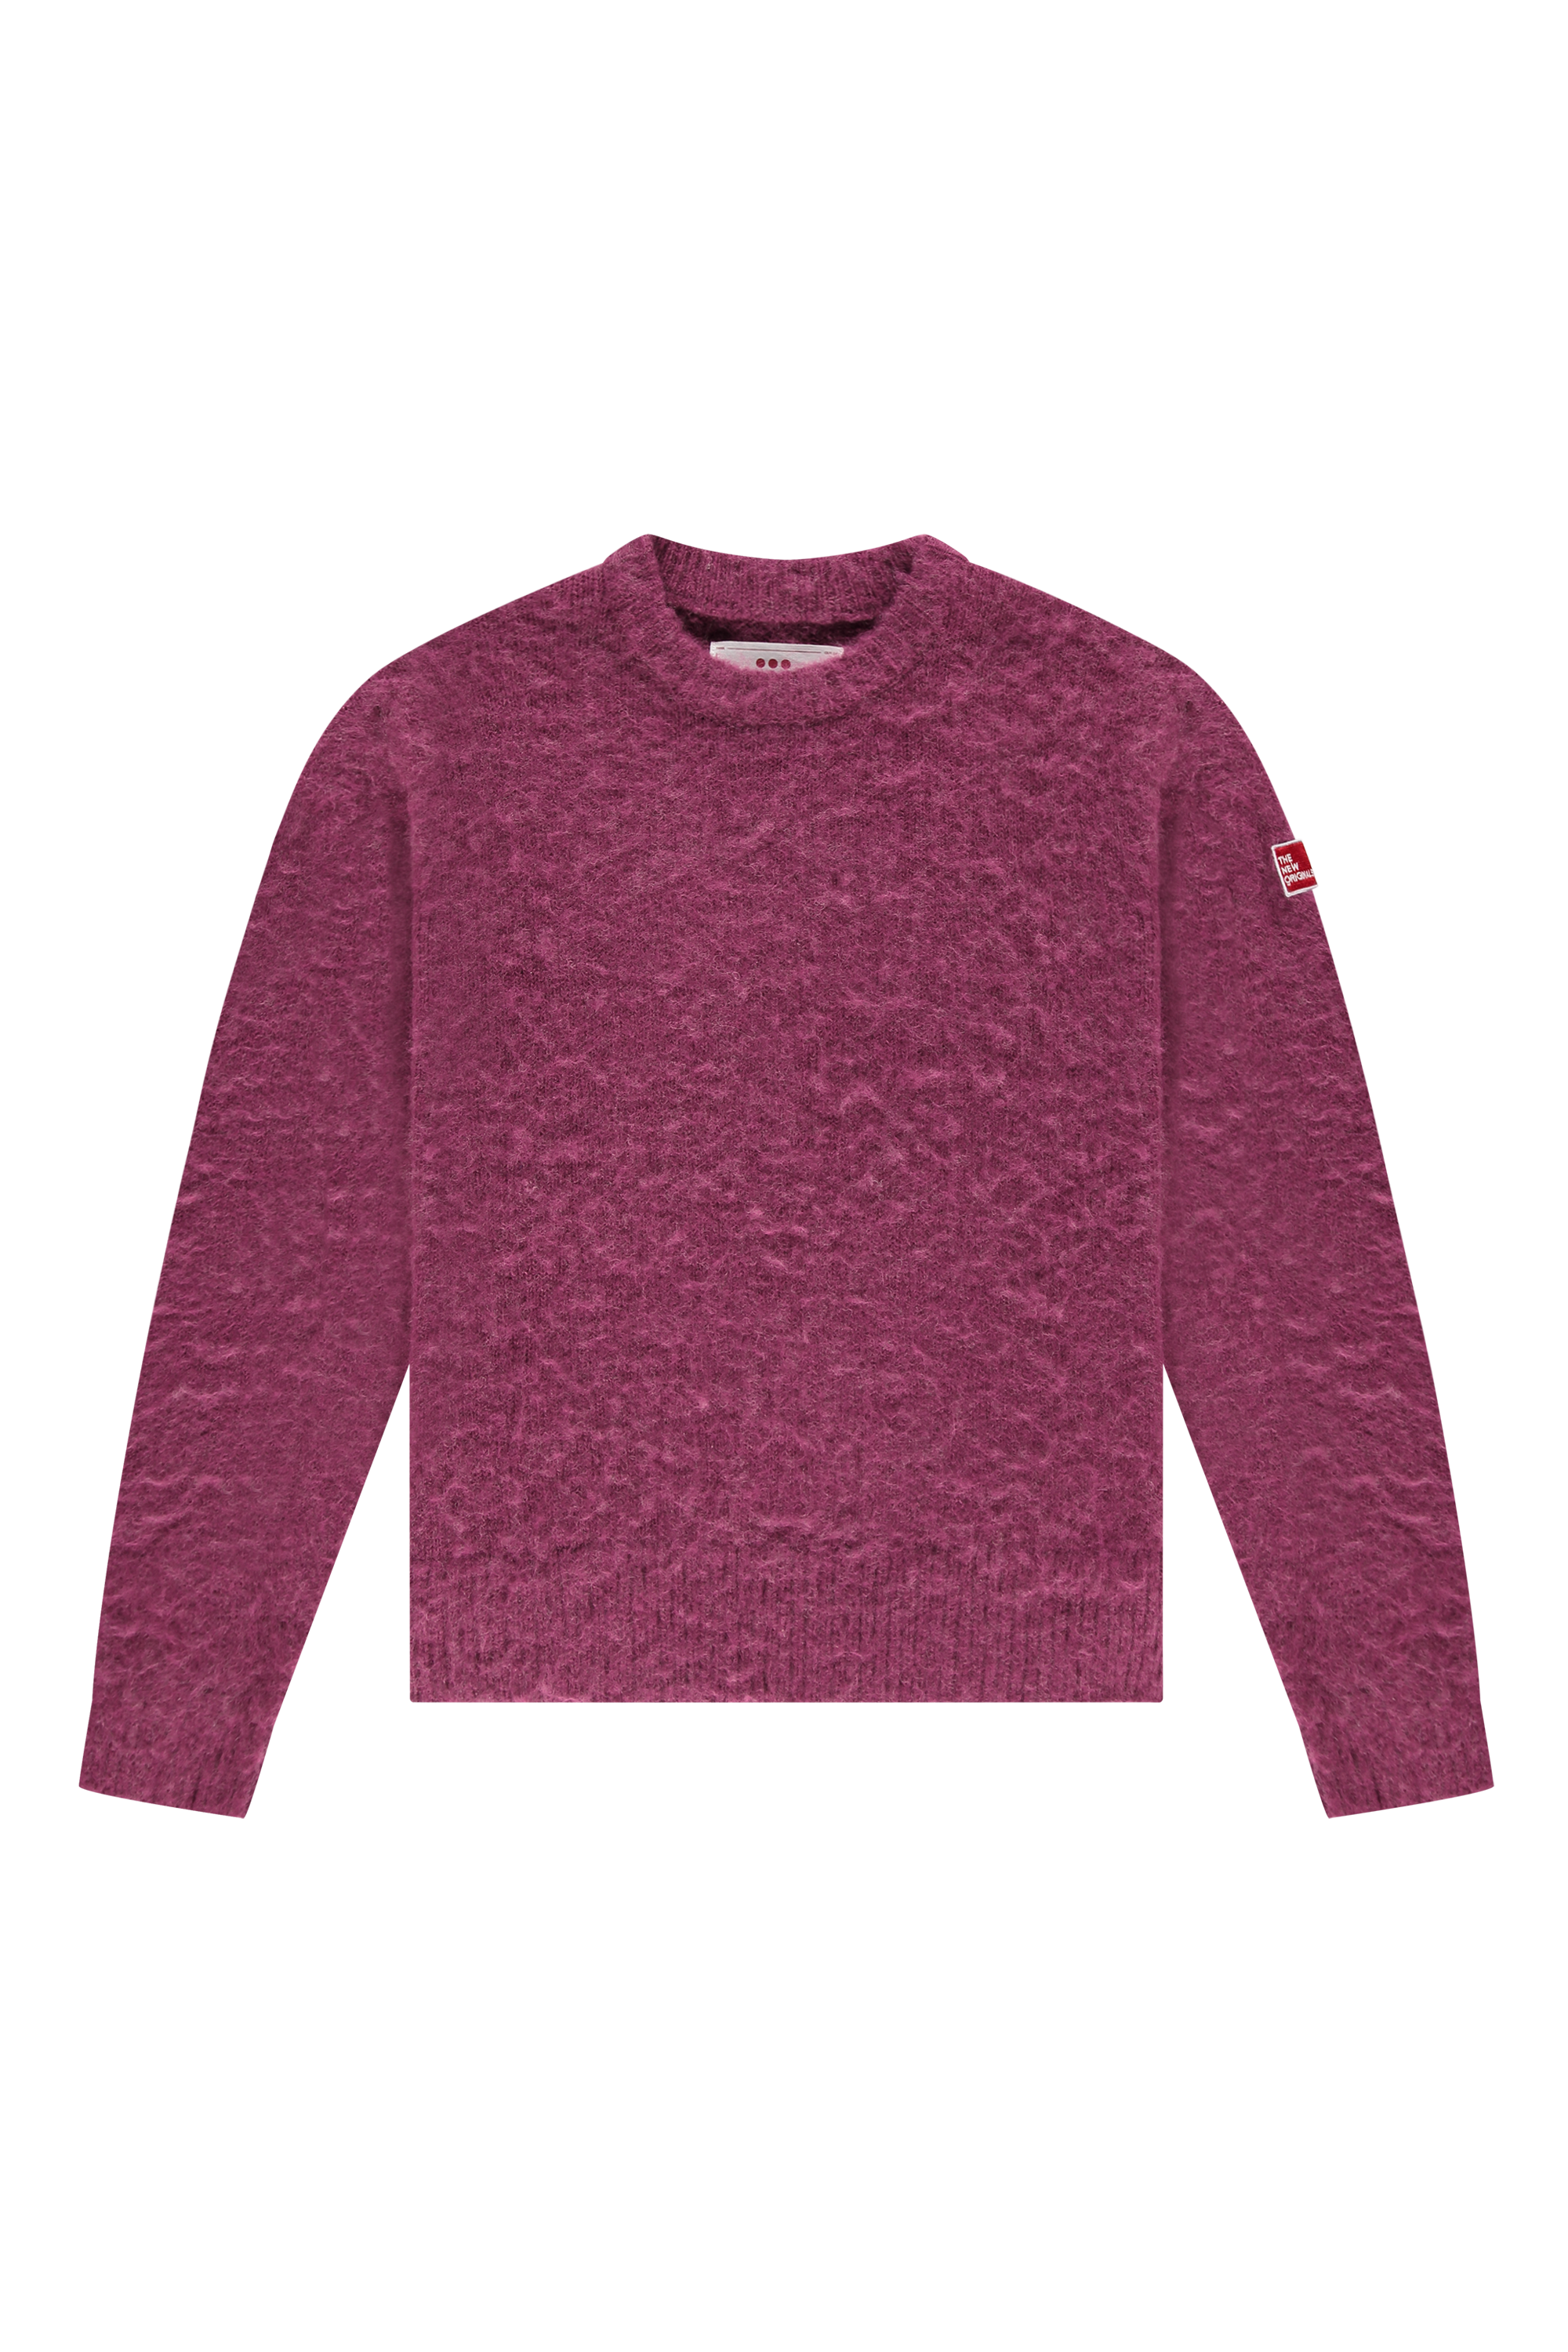 files-mohairknit_purple_front-png